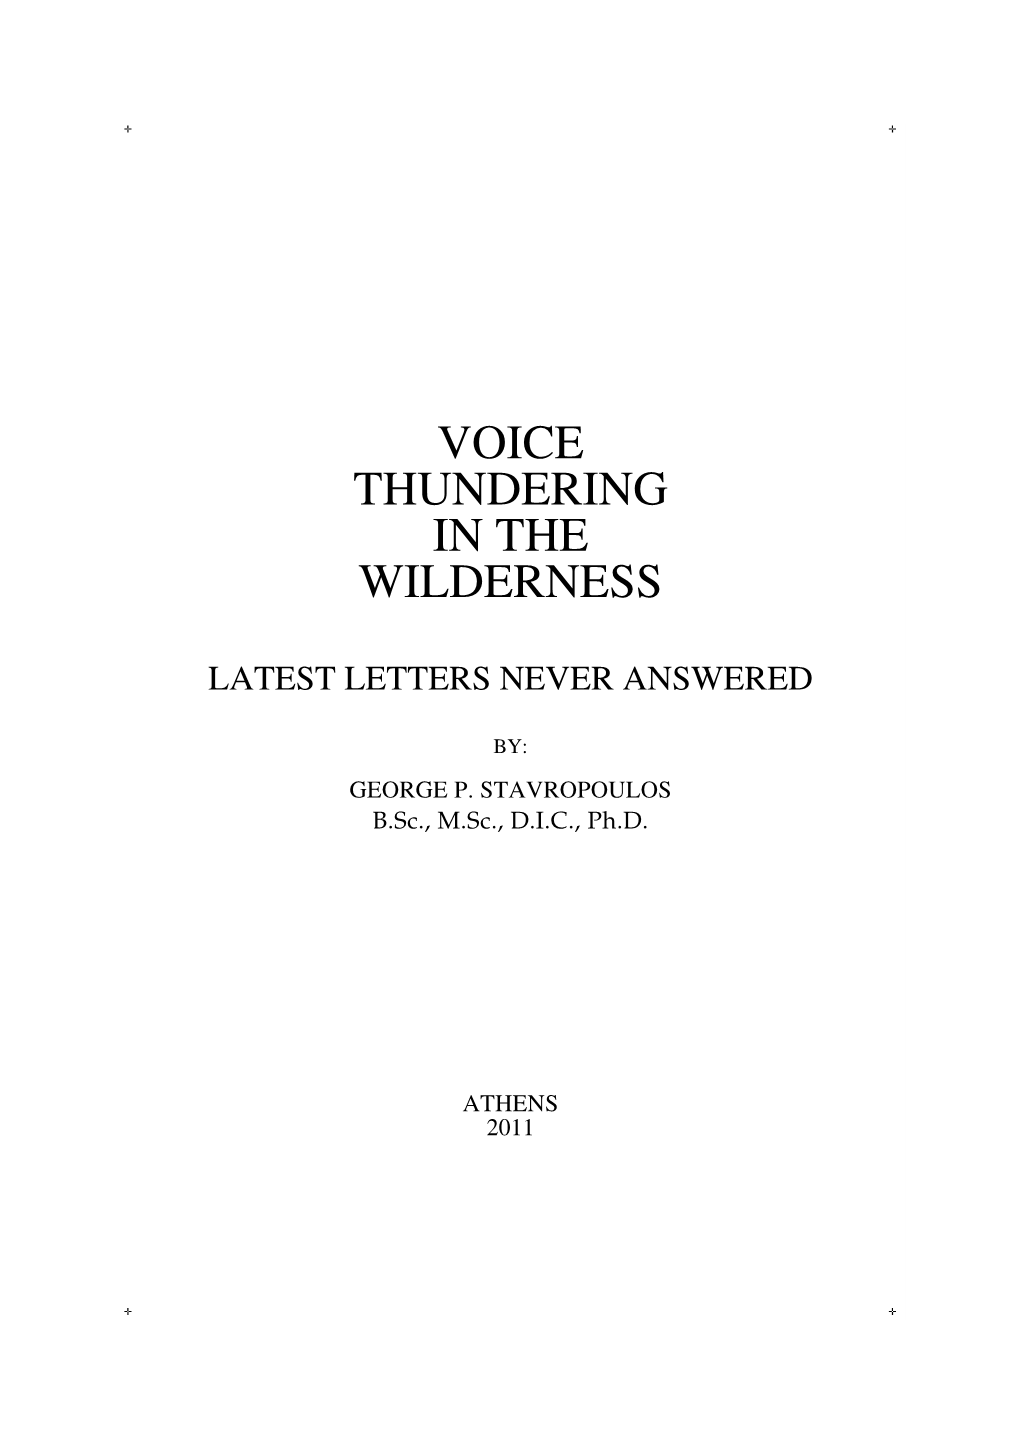 Voice Thundering in the Wilderness